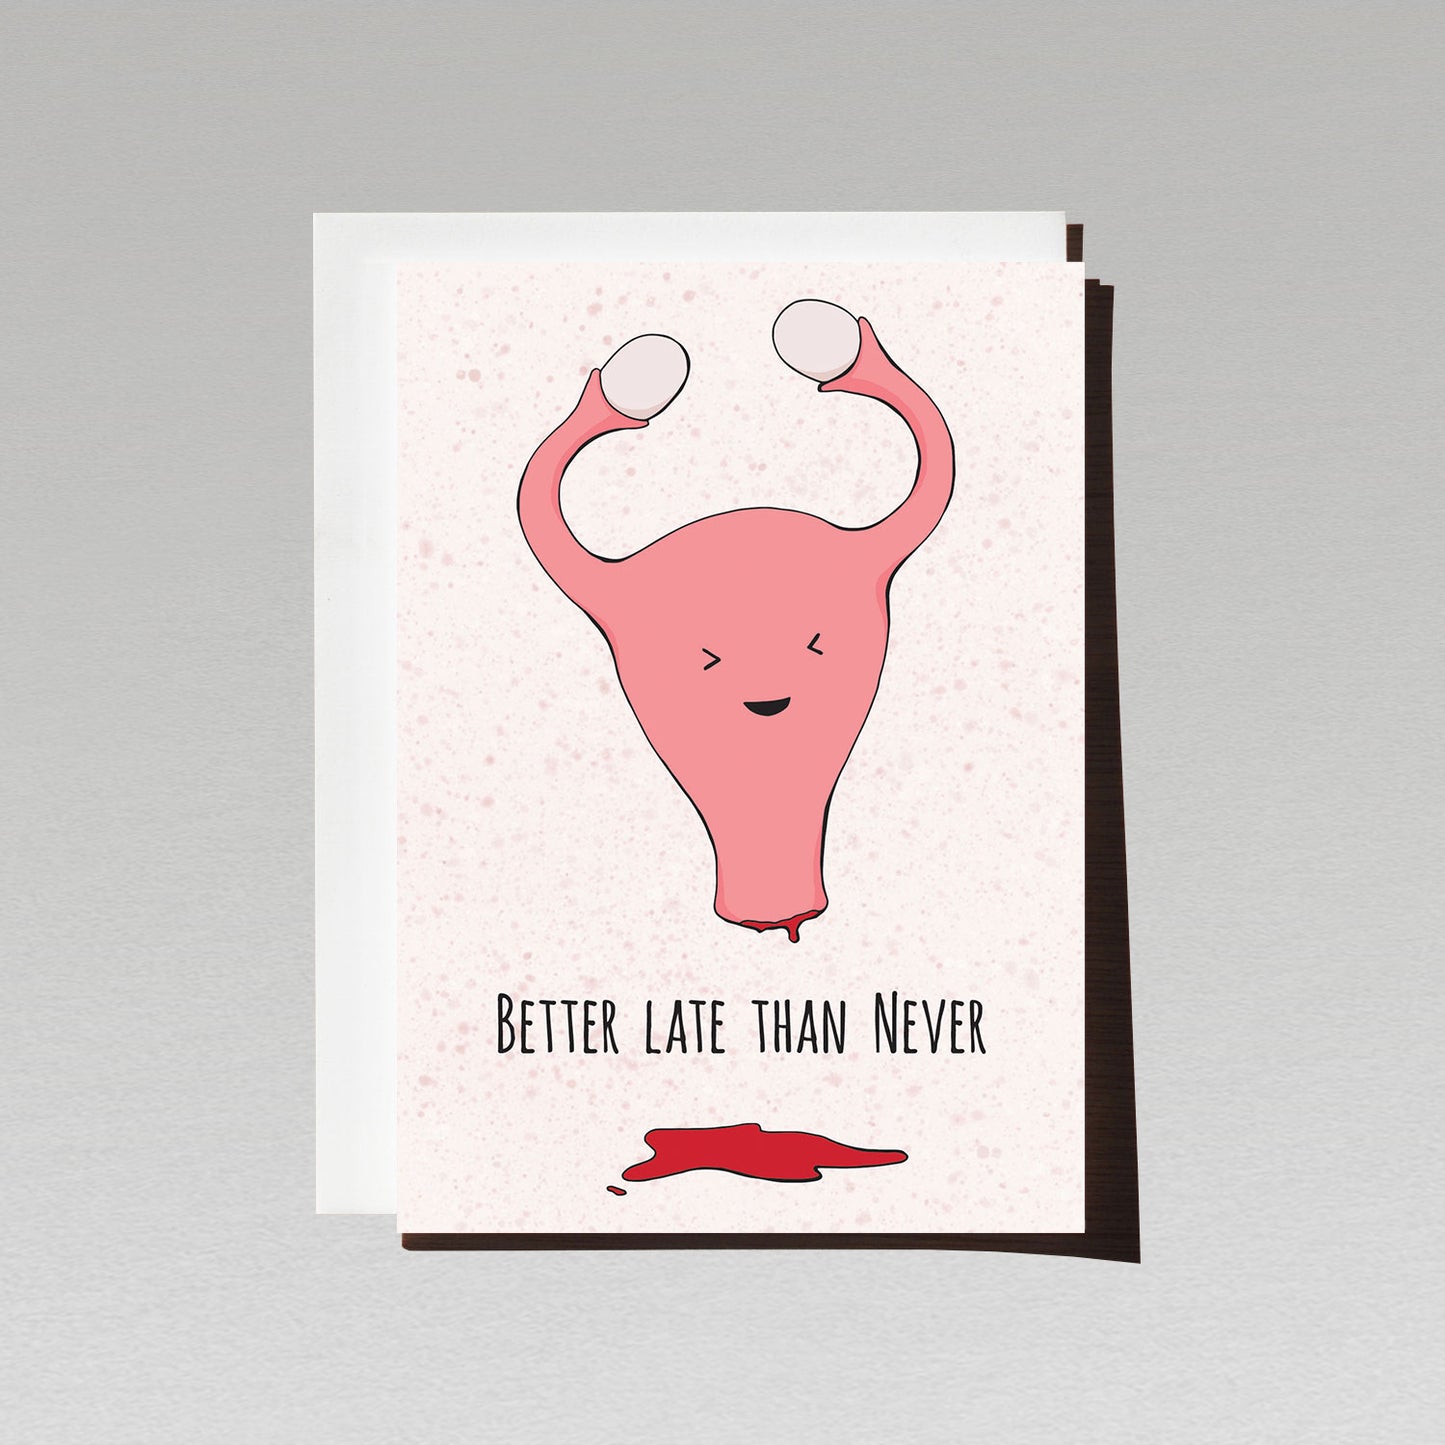 happy uterus jumps for joy with period blood puddle underneath with text better late than never